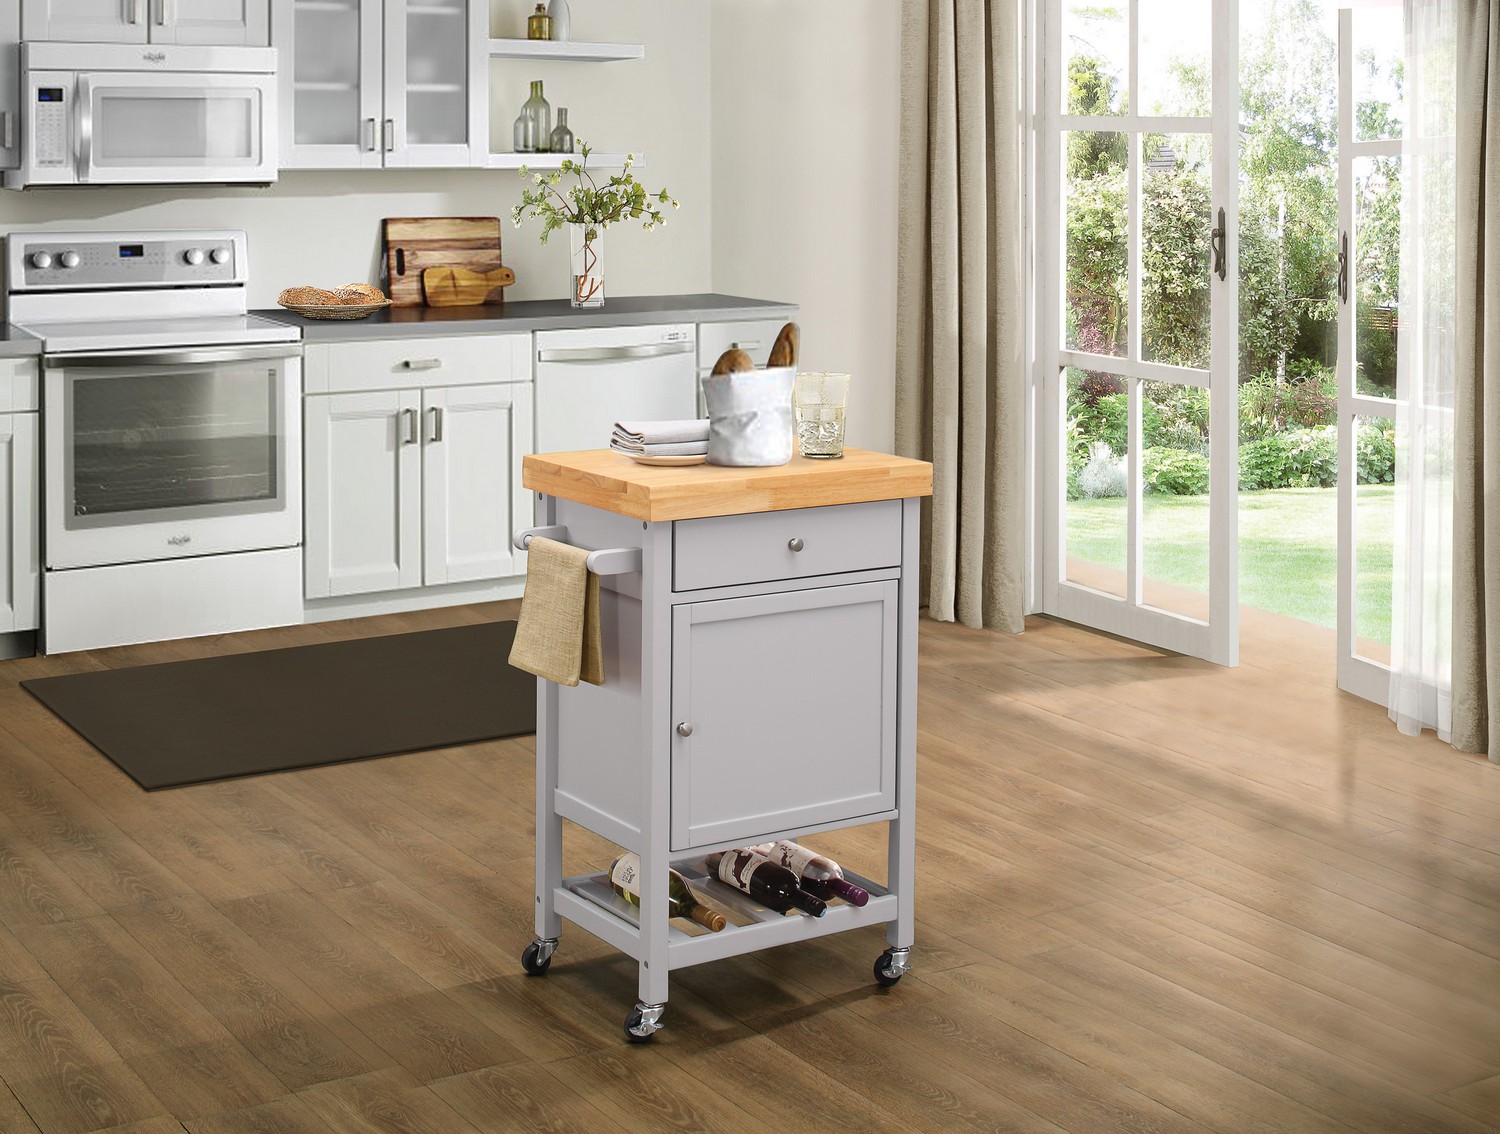 Homelegance Zinnia Kitchen Cart with Casters